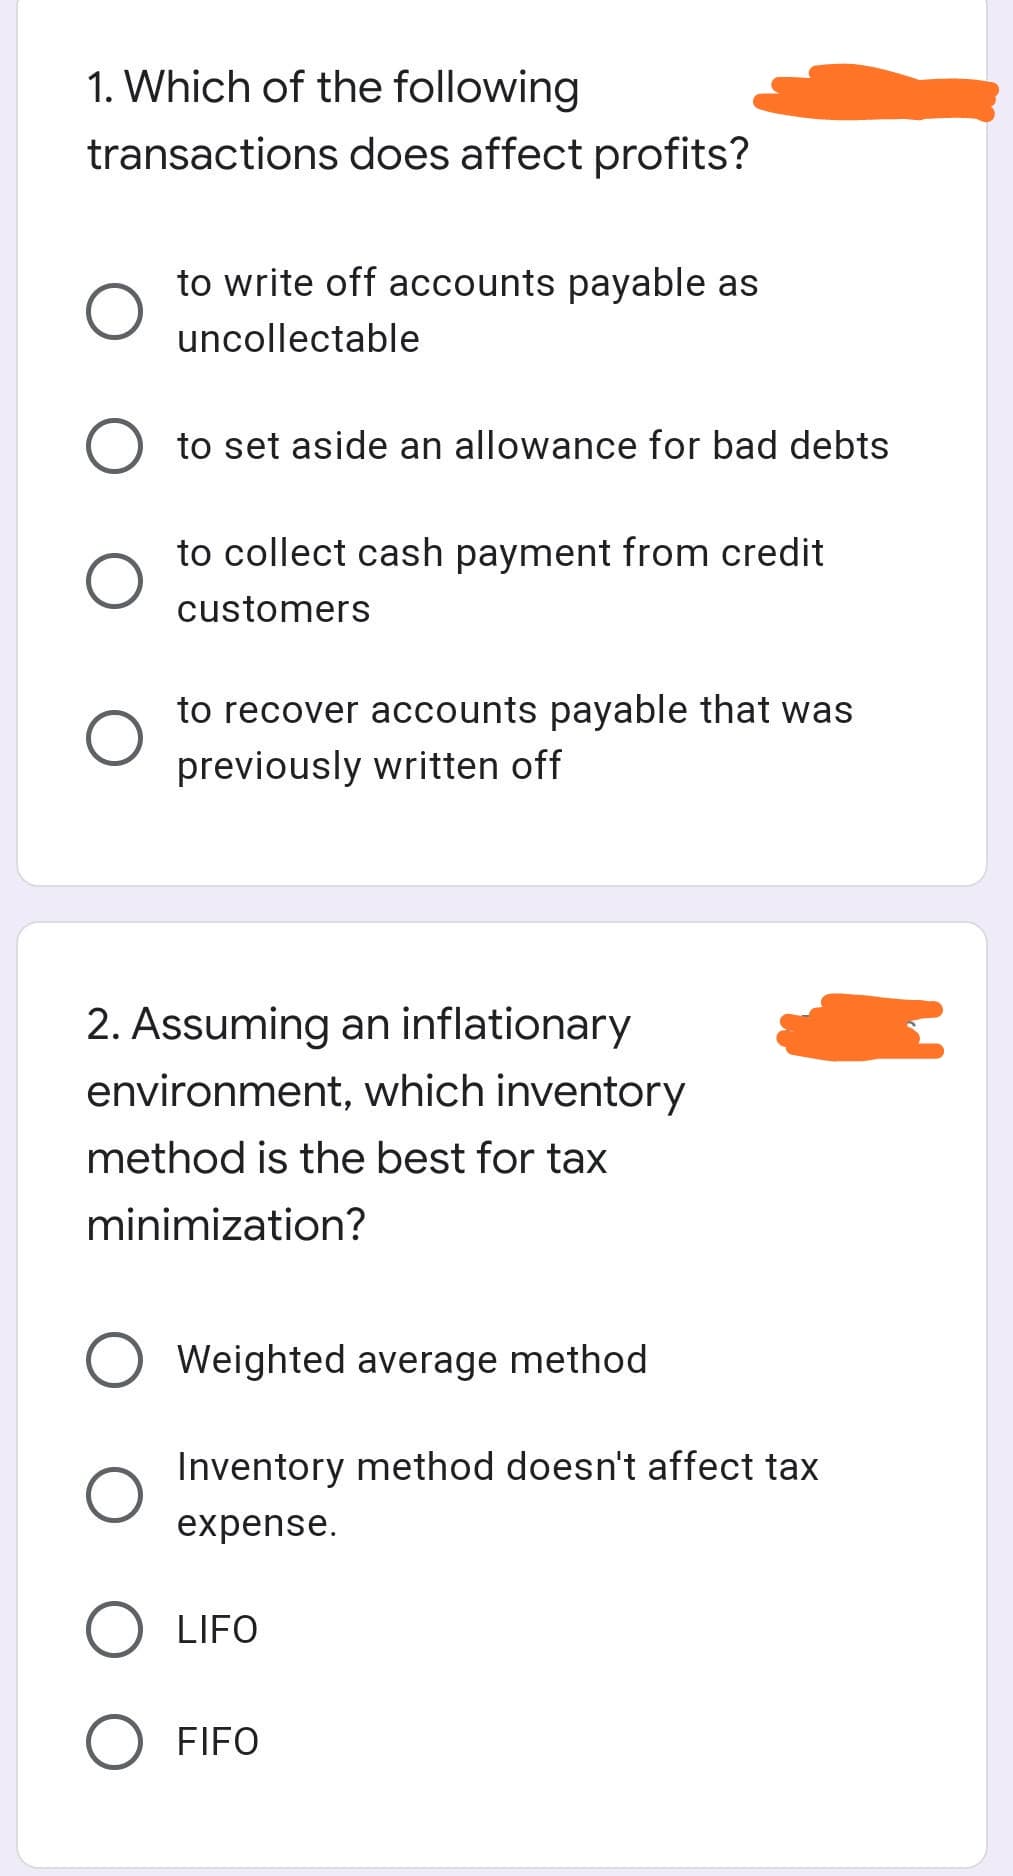 1. Which of the following
transactions does affect profits?
to write off accounts payable as
uncollectable
to set aside an allowance for bad debts
to collect cash payment from credit
customers
to recover accounts payable that was
previously written off
2. Assuming an inflationary
environment, which inventory
method is the best for tax
minimization?
Weighted average method
Inventory method doesn't affect tax
expense.
LIFO
FIFO
